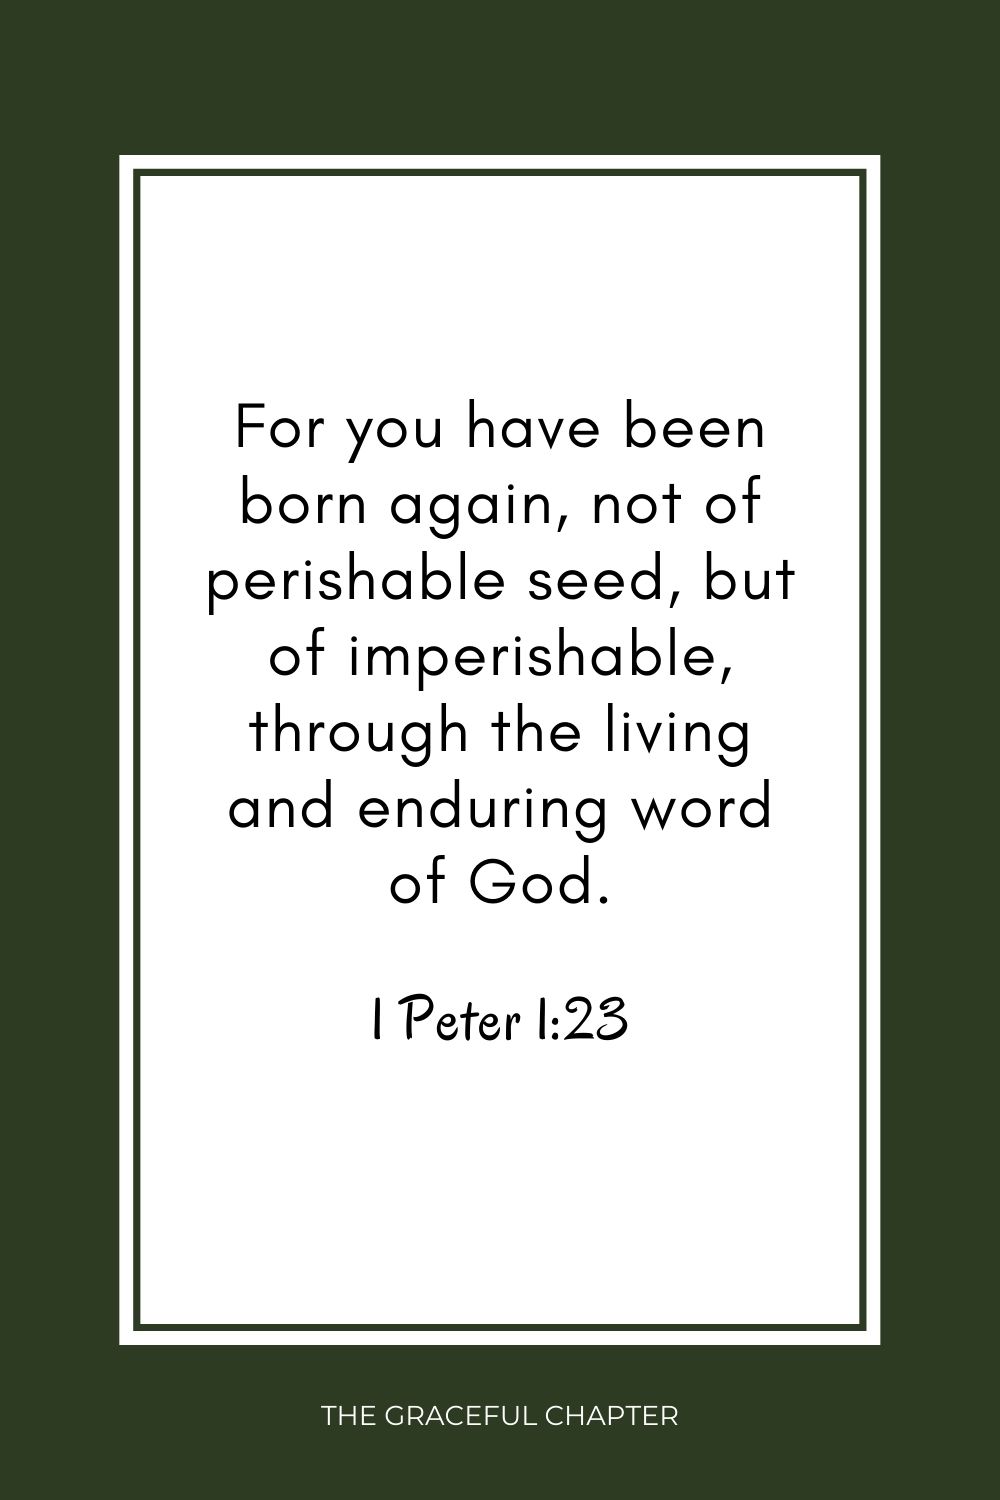 For you have been born again, not of perishable seed, but of imperishable, through the living and enduring word of God. 1 Peter 1:23